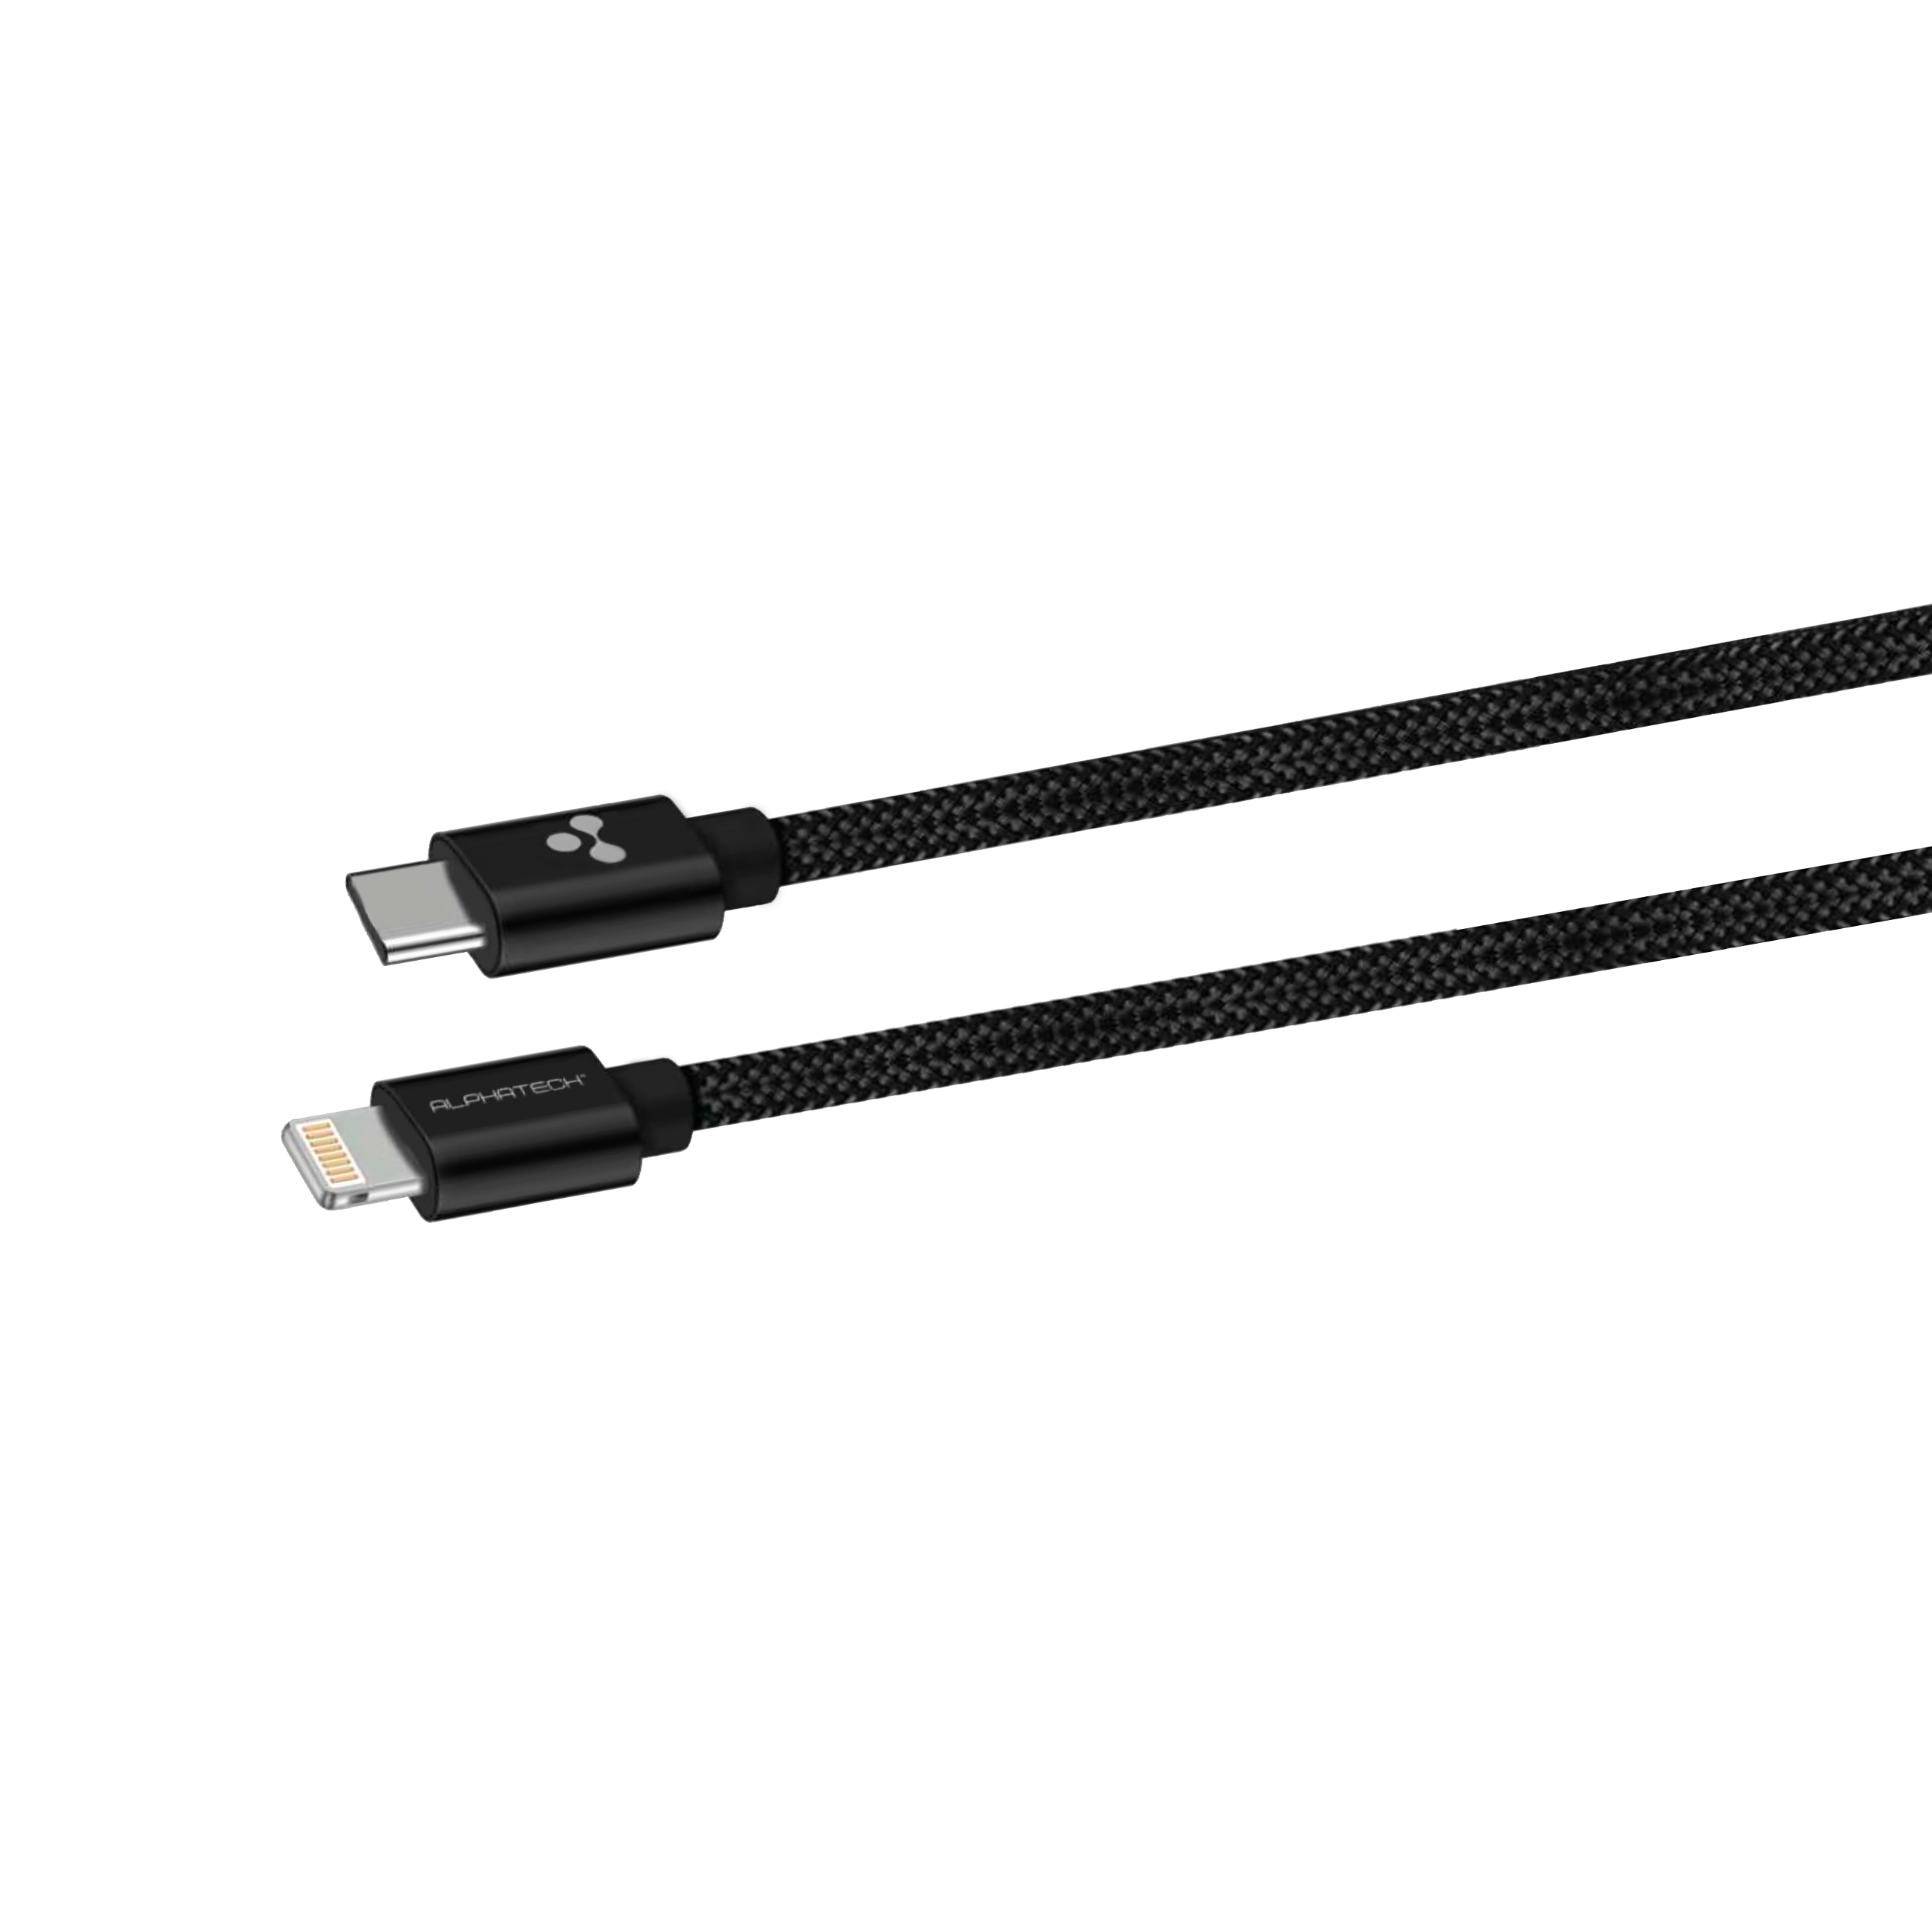 Alphatech Durawire Gold Type C to Lightning Cable